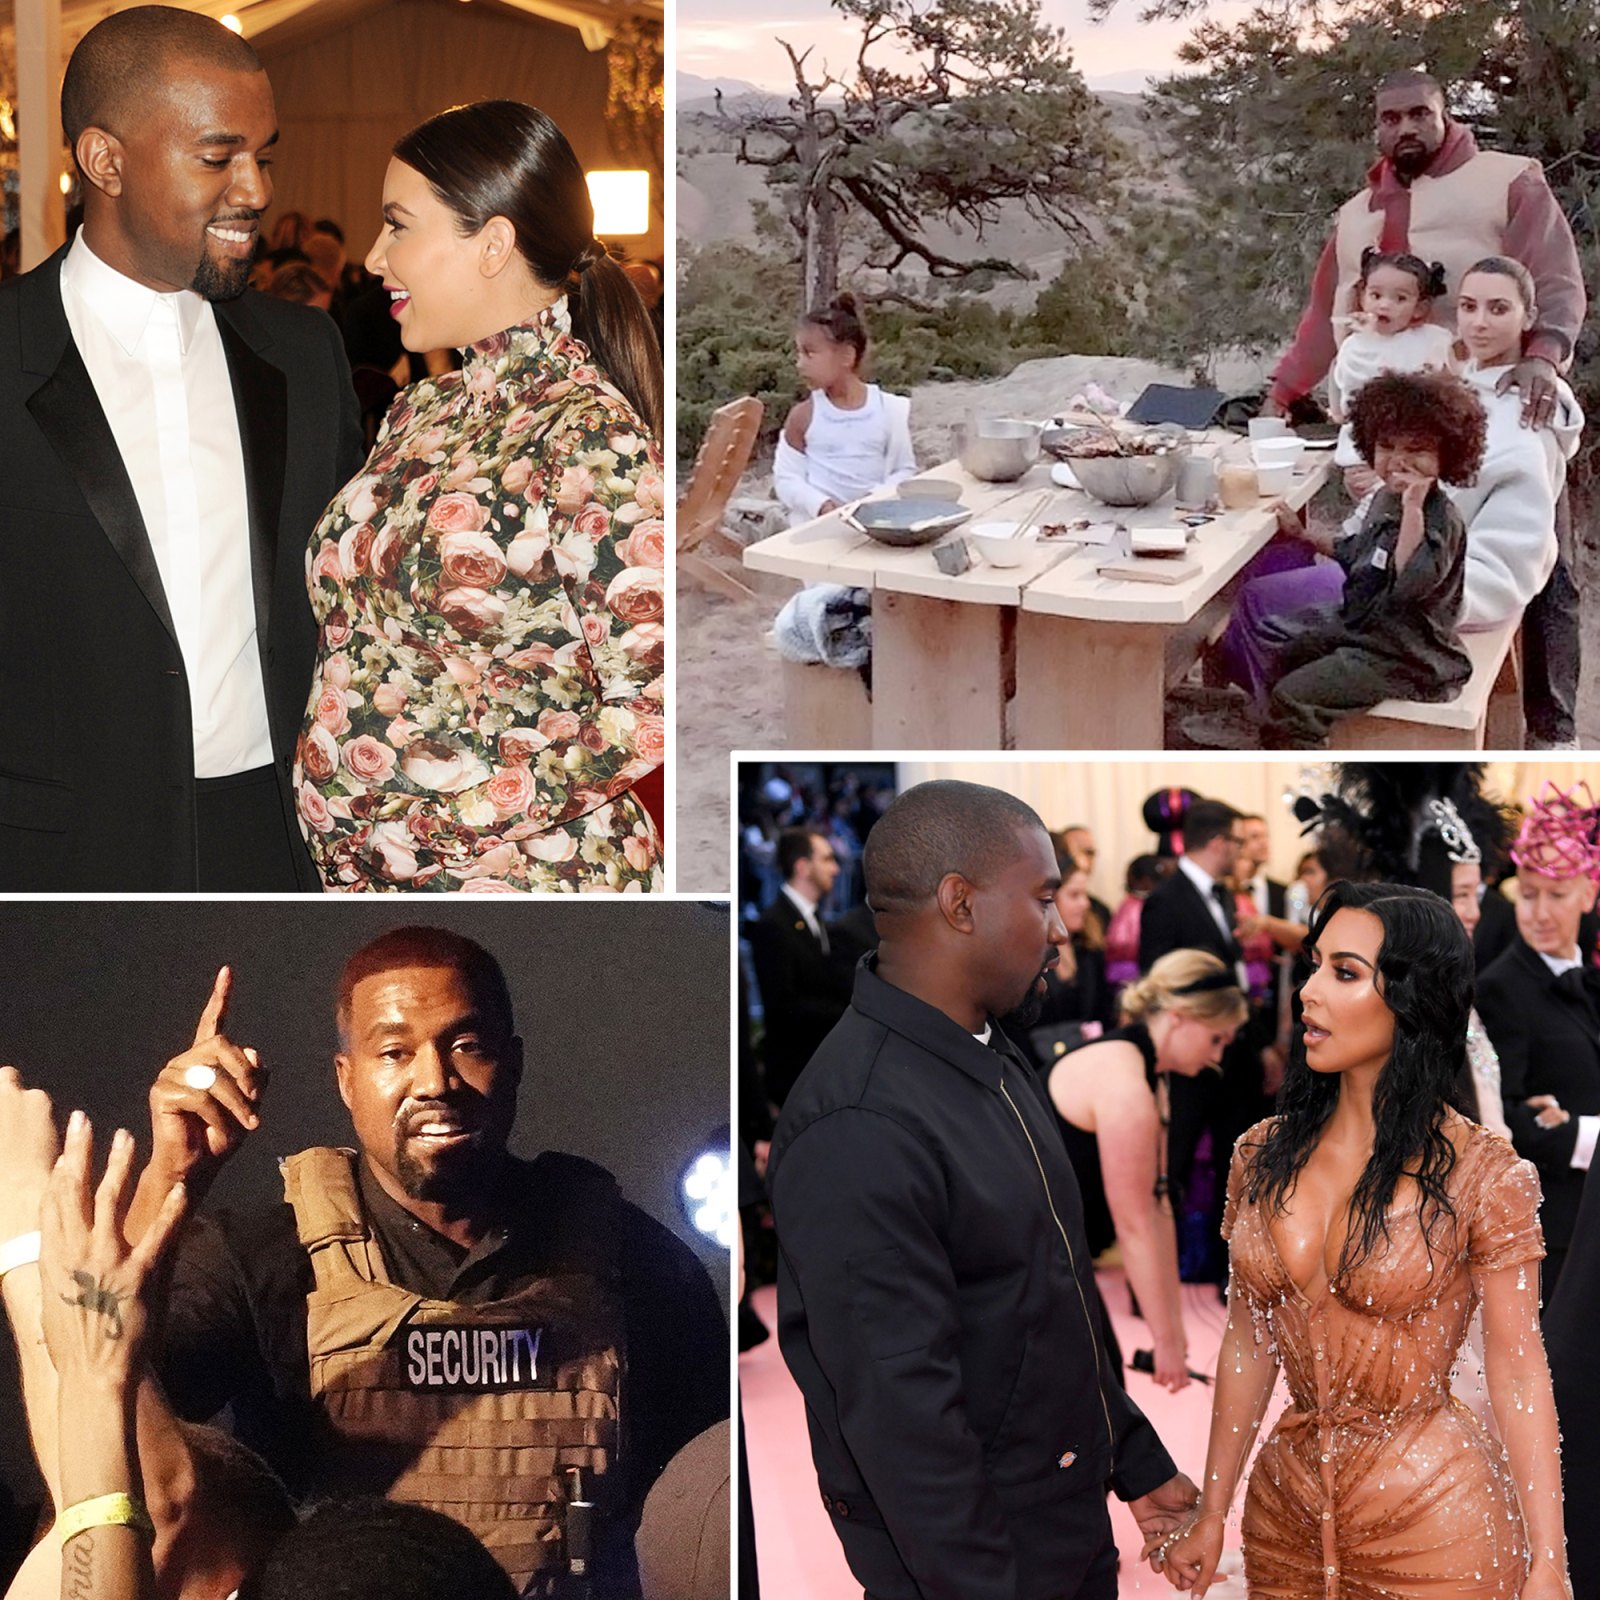 Over the years, Kim Kardashian and Kanye West have gone through highs and lows.